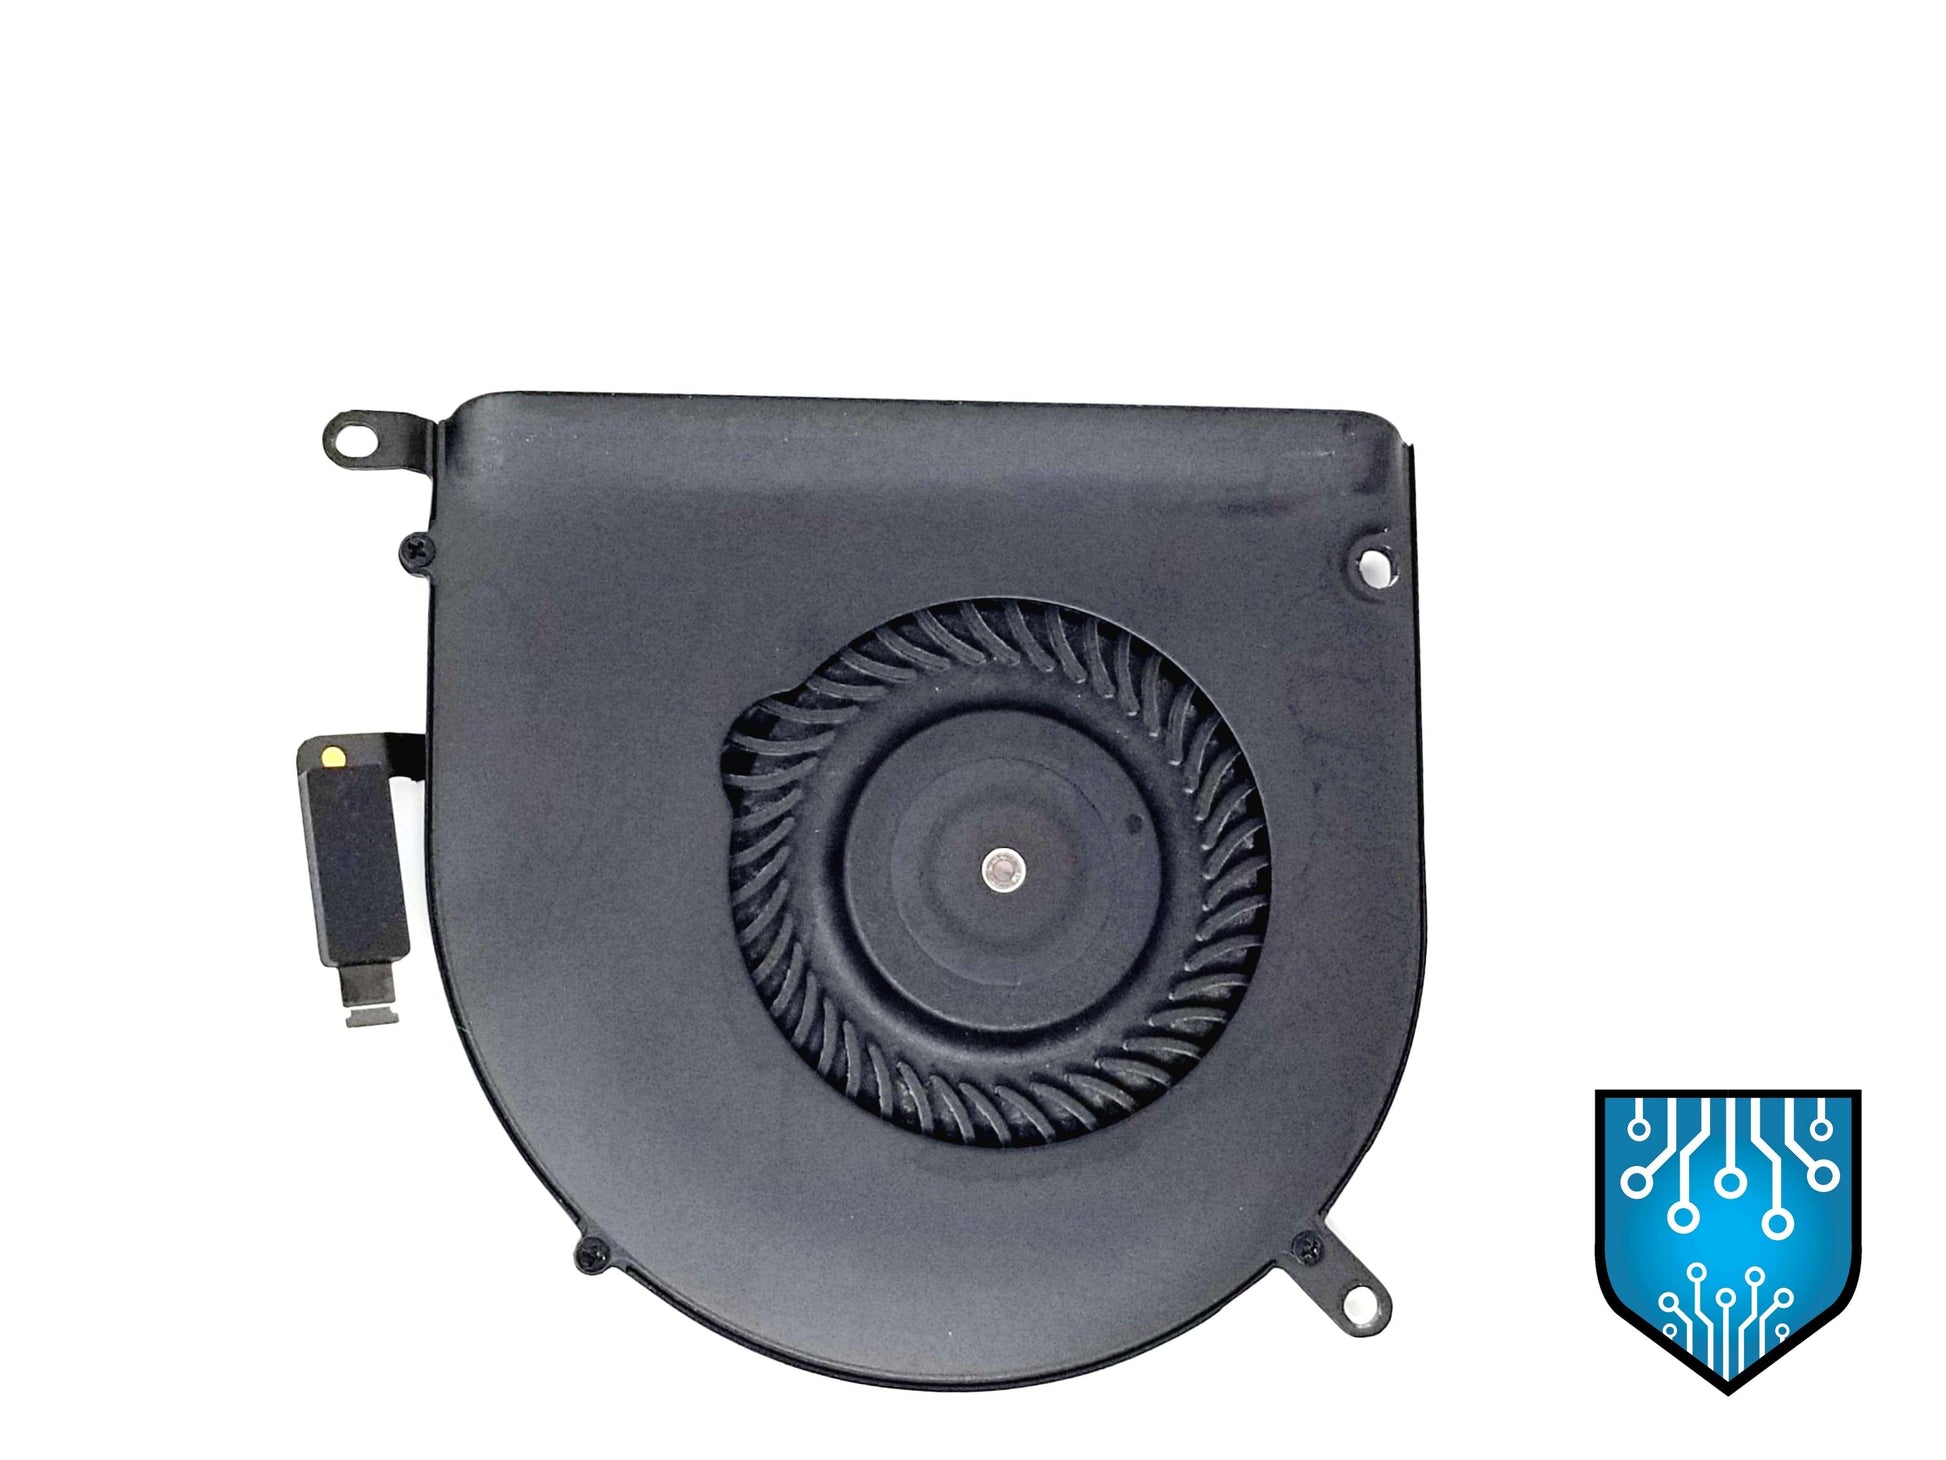 CPU Fan For Apple MacBook Pro Late 2013 and Mid 2014 15-inch